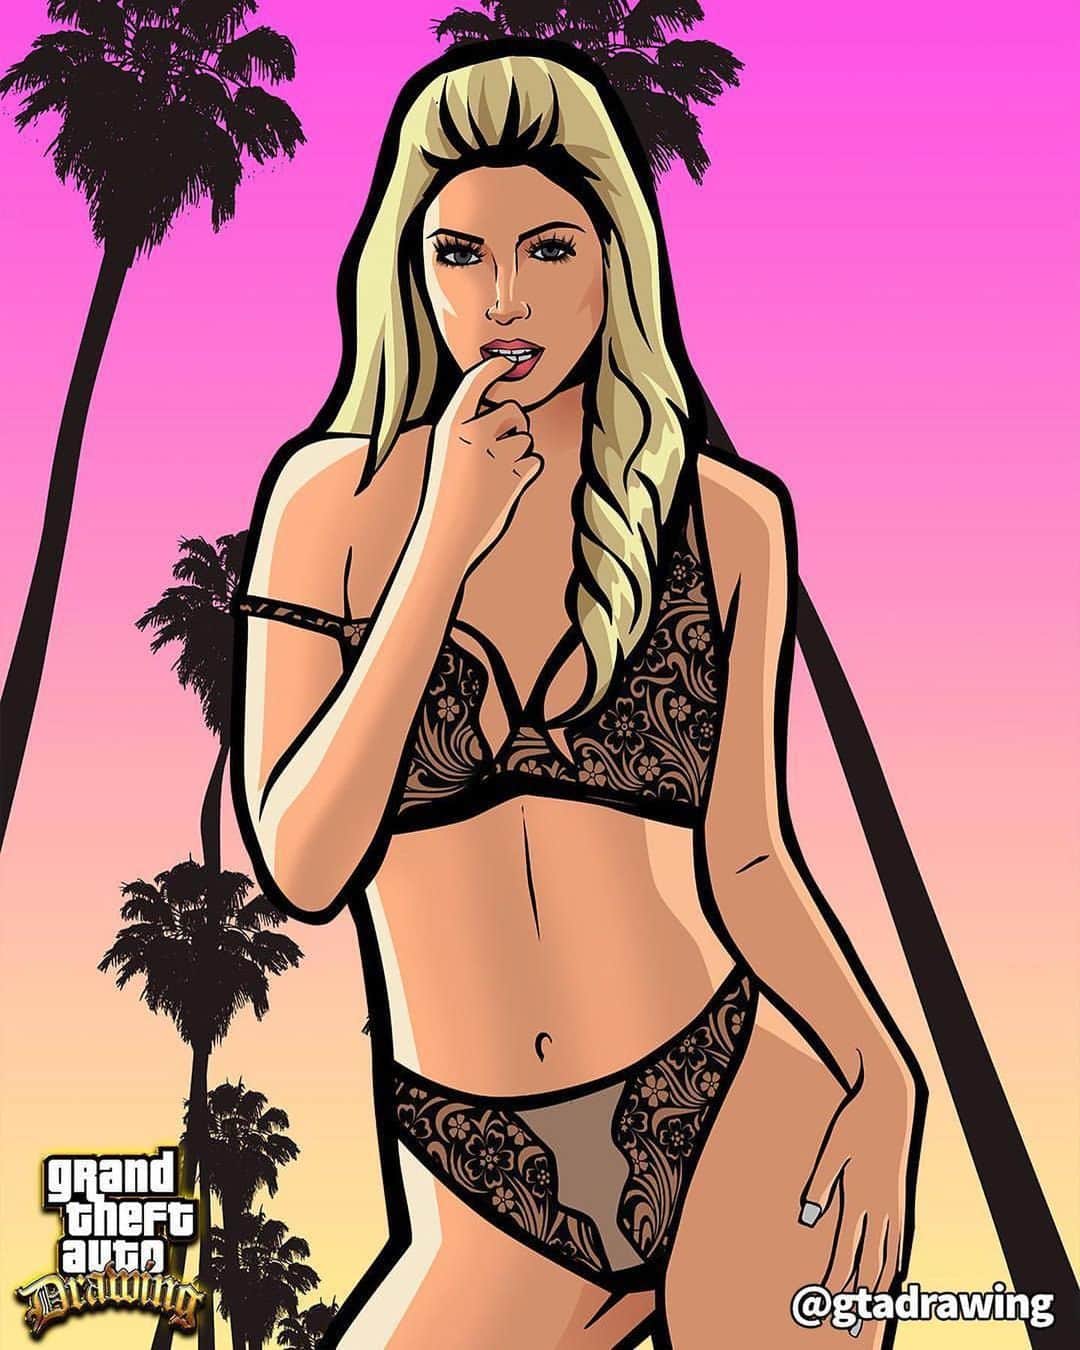 Charlotte Stokelyのインスタグラム：「Which GTA drawing is your favorite? 😍 Have you played GTA?  #gtadrawing #gta #gta5 #gtaonline #blond #charlottestokely #videogames #fanart」